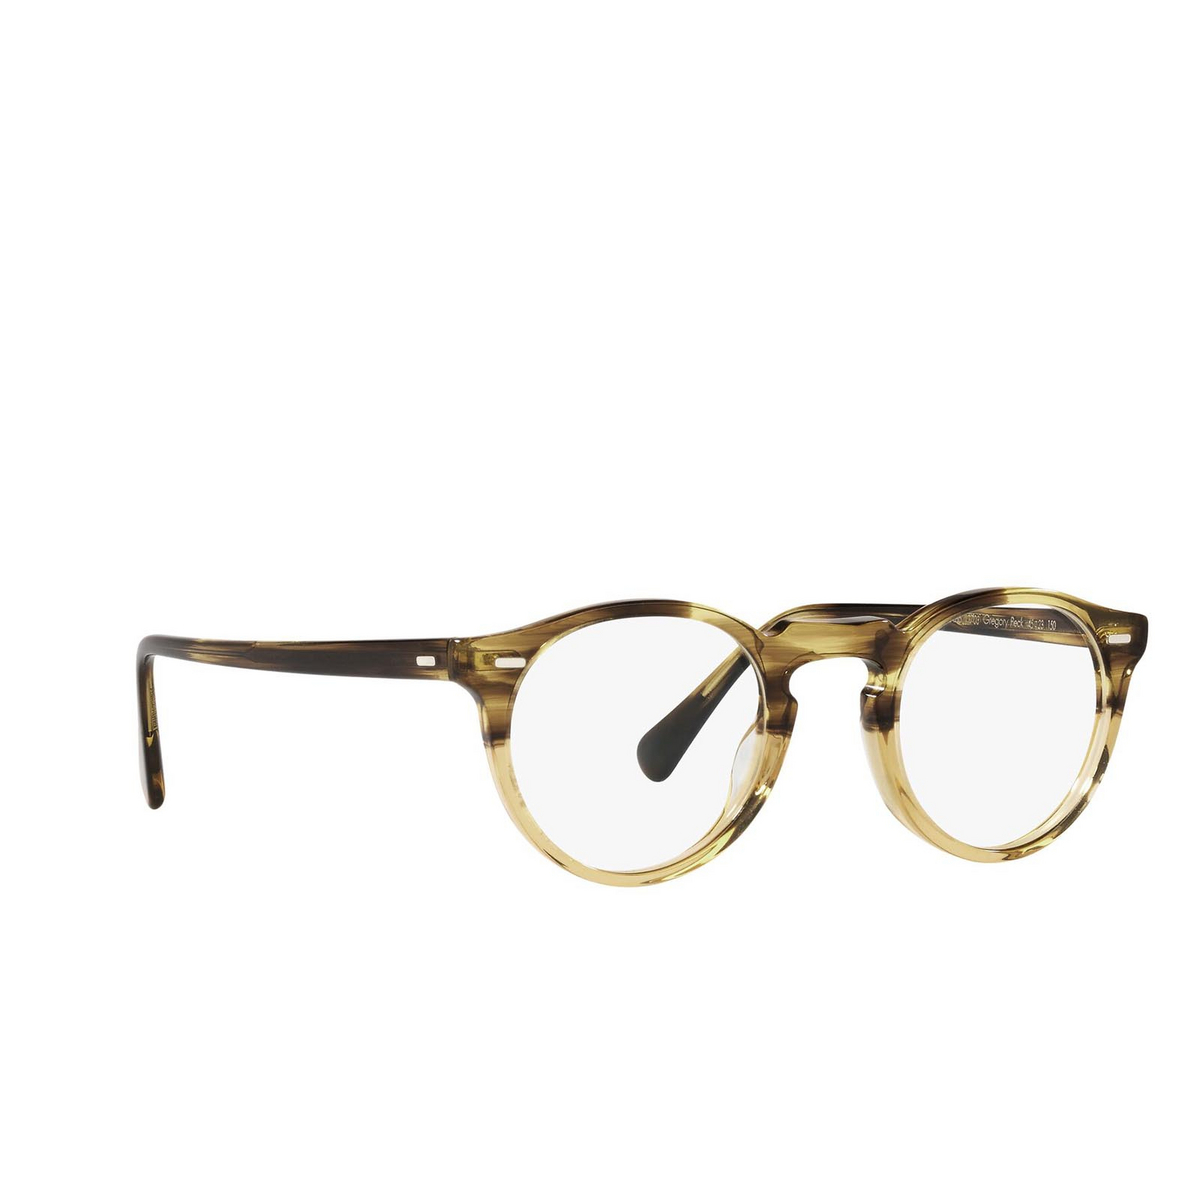 Oliver Peoples GREGORY PECK Eyeglasses 1703 Canarywood Gradient - three-quarters view